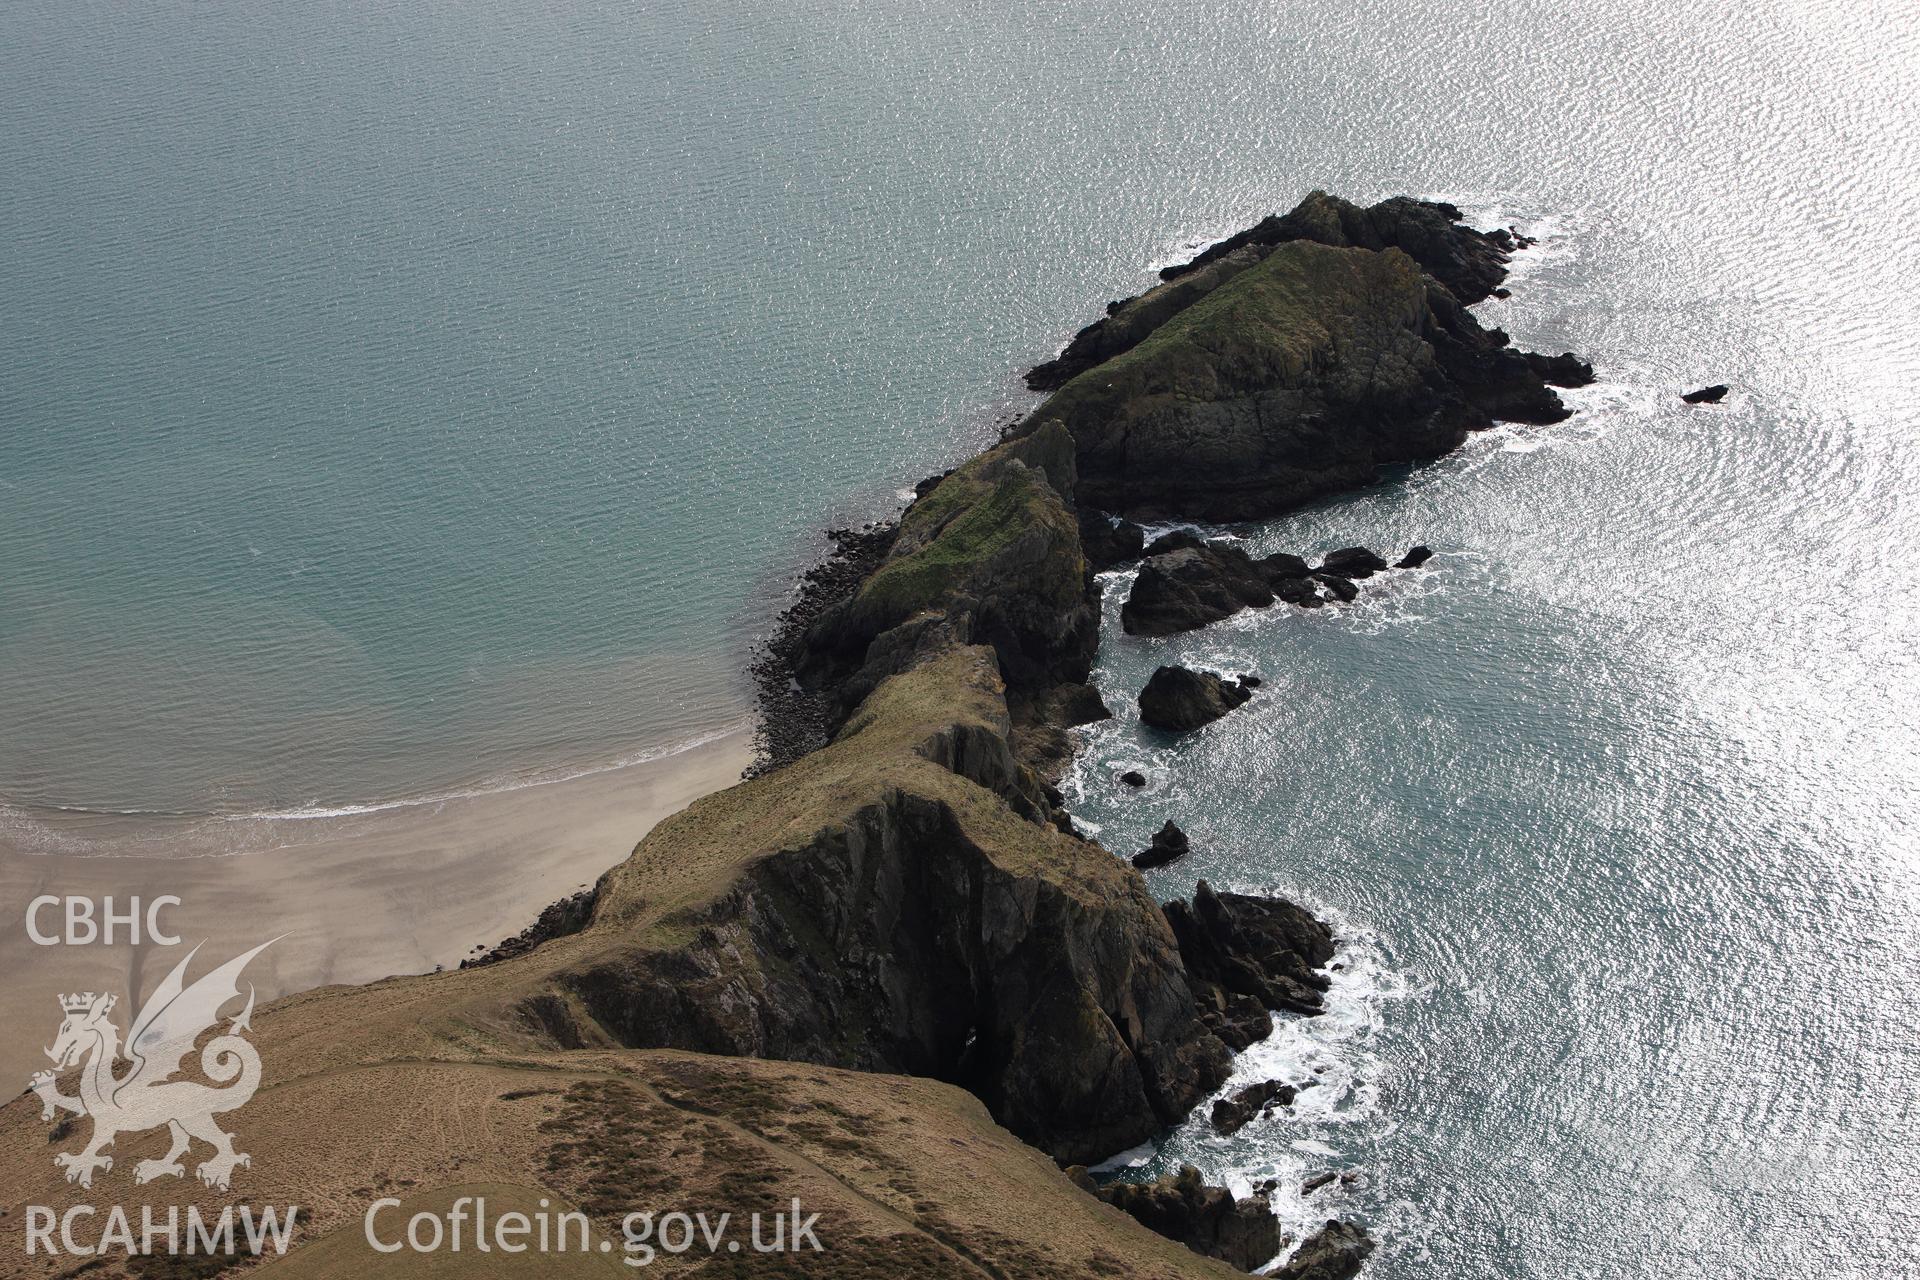 RCAHMW colour oblique aerial photograph of Dinas Fach, Solva. Taken on 02 March 2010 by Toby Driver